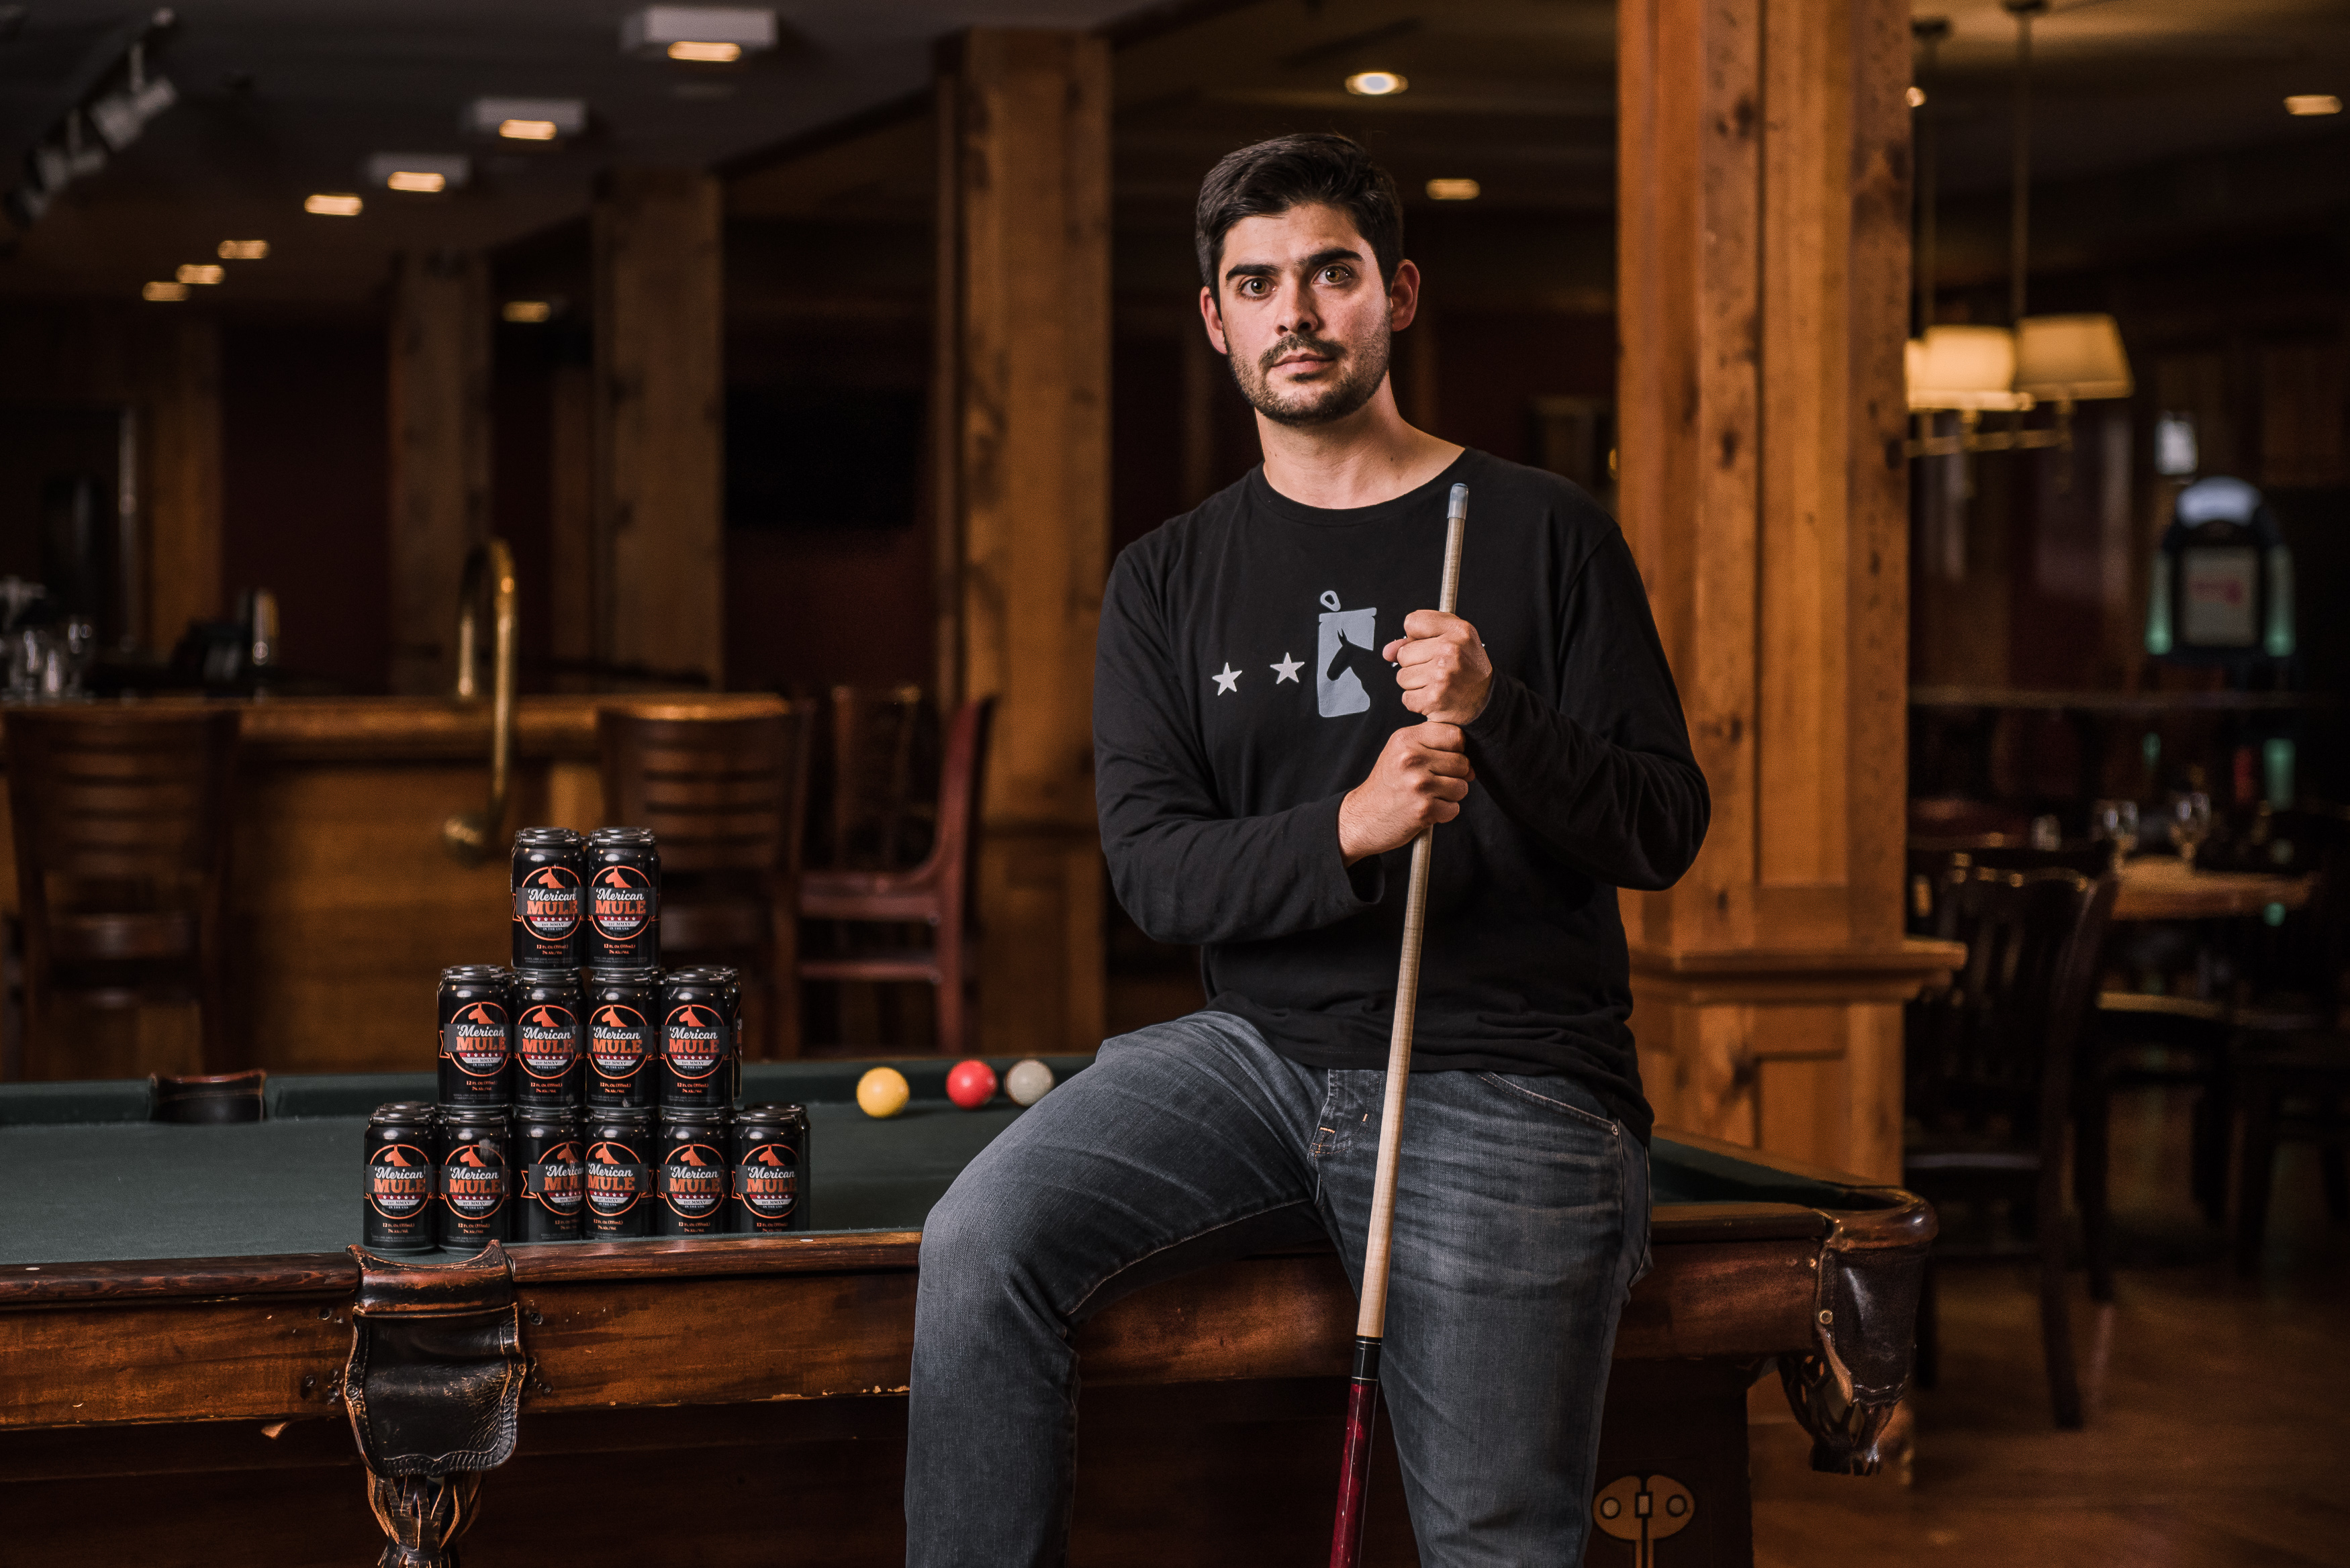 UConn graduate Dean Mahoney, founder of the 'Merican Mule cocktail company, posing with a pool cue.